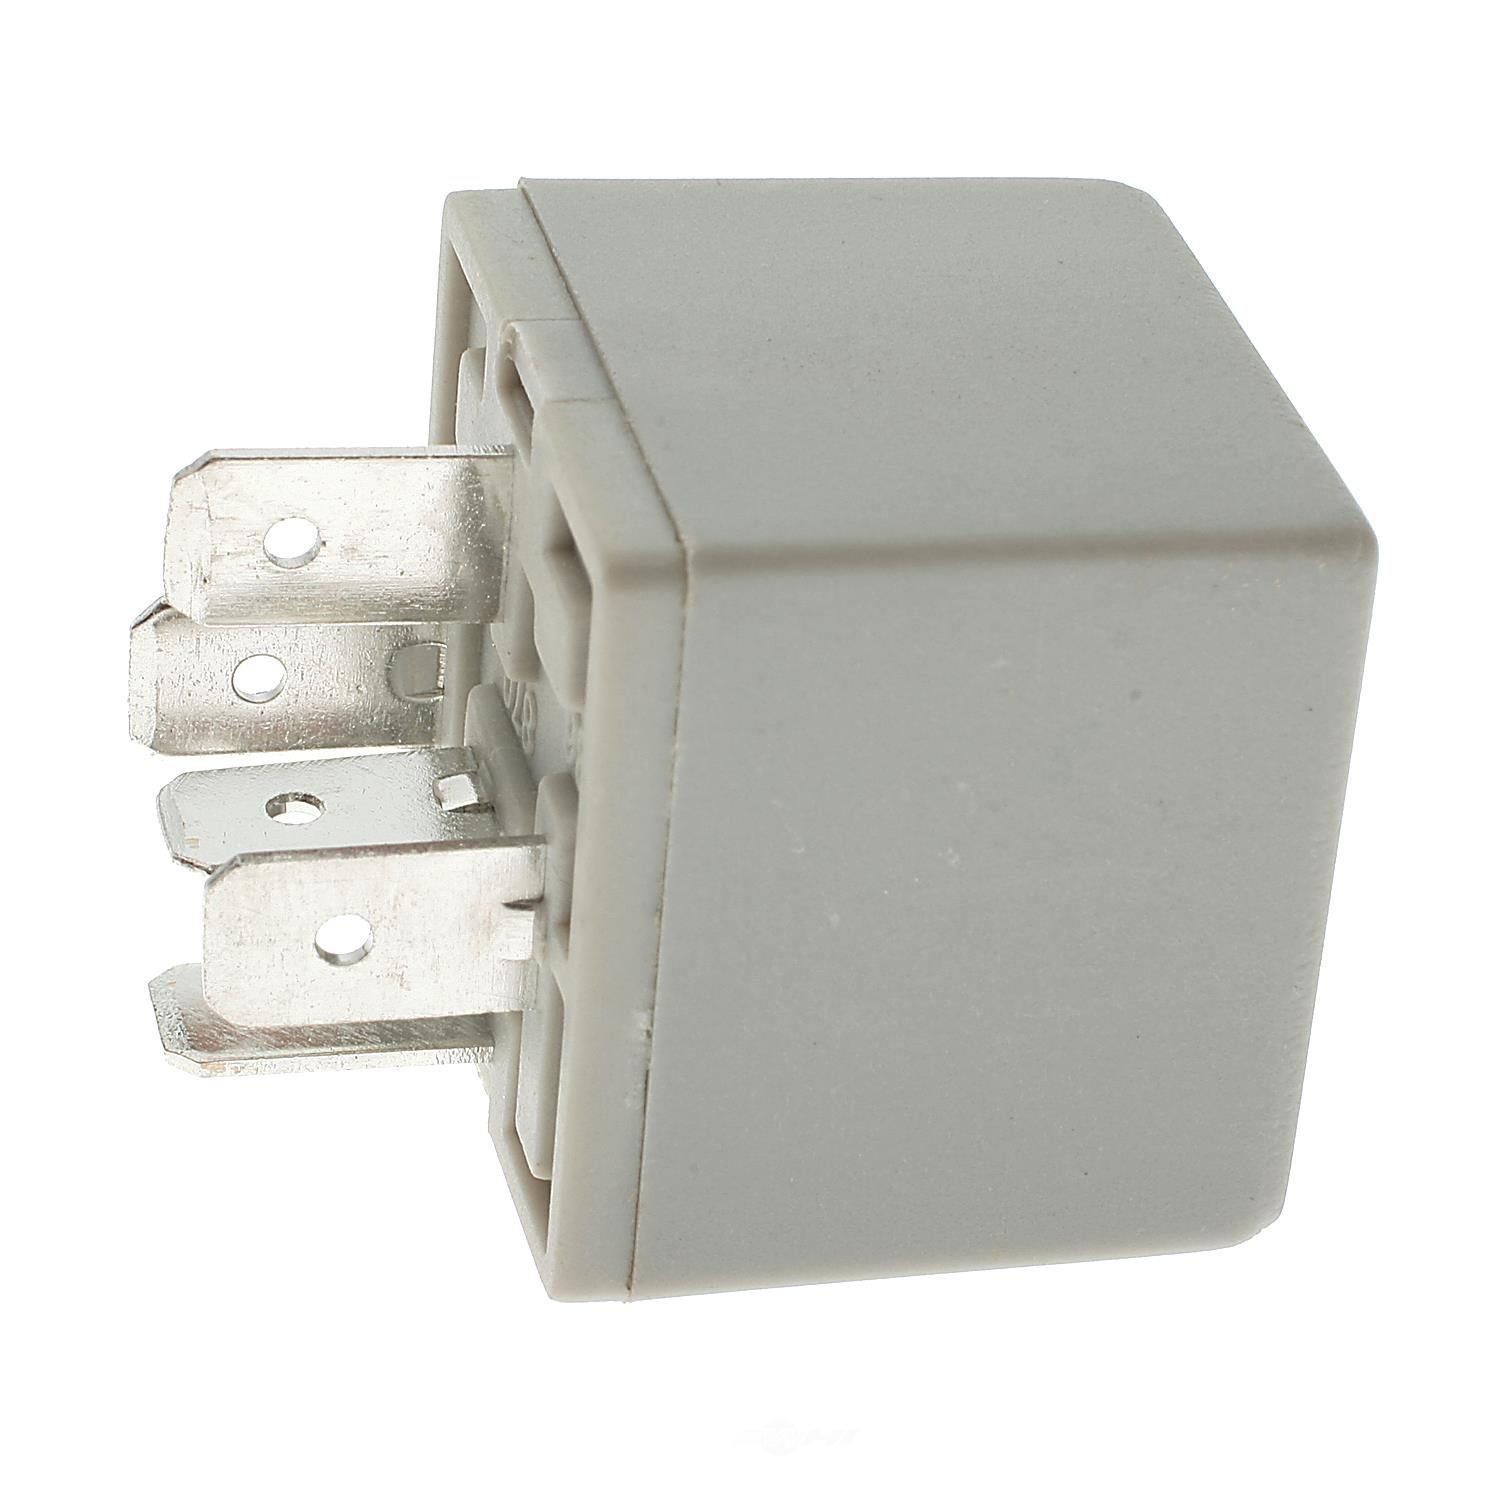 STANDARD T-SERIES - Auto Trans Spark Control Relay - STT RY116T